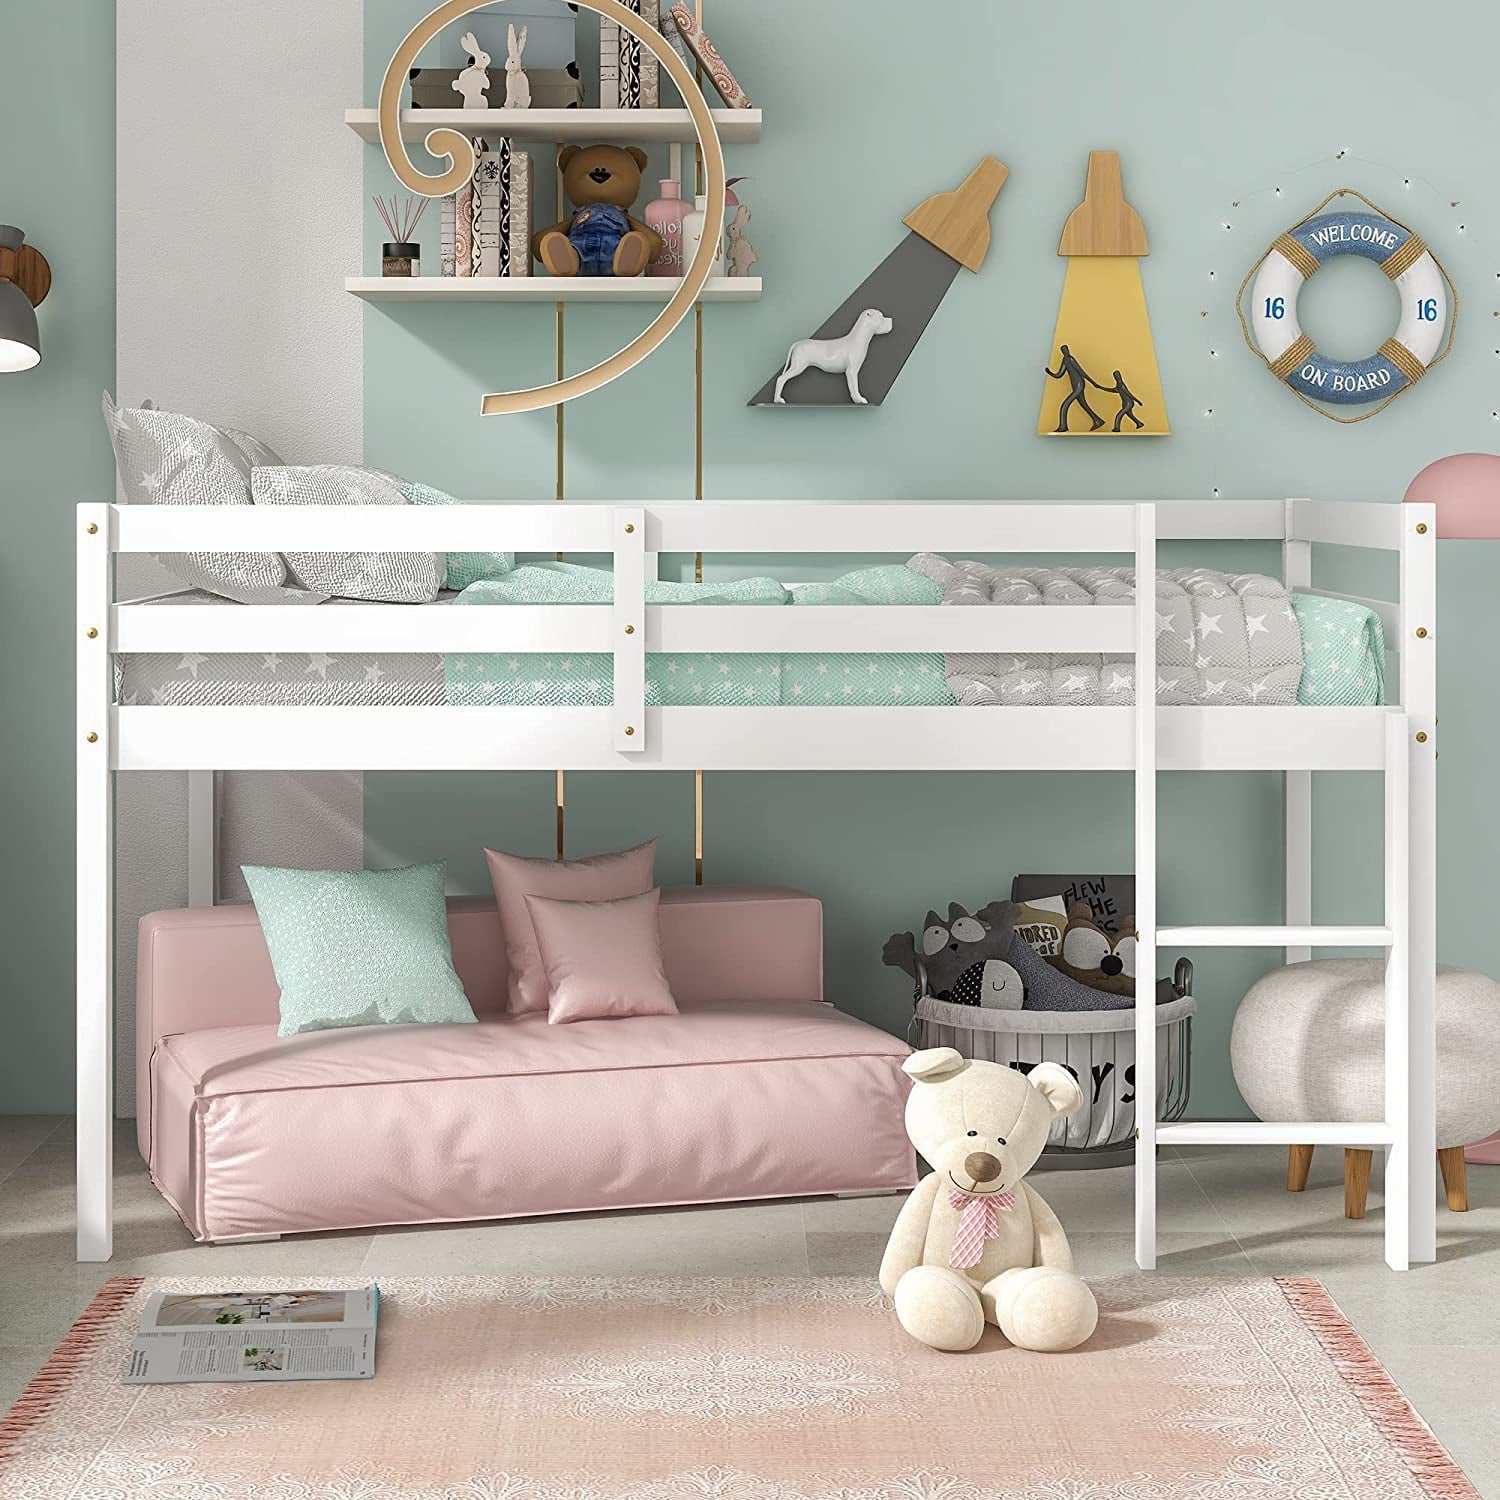 Twin Wood Loft Bed with Full-length Safety Rail and Ladder, Modern Loft Bed Frame for Kids Teens Adult, Space Saving Bedroom Low Loft Bed, No Box Spring Needed, White, J2309